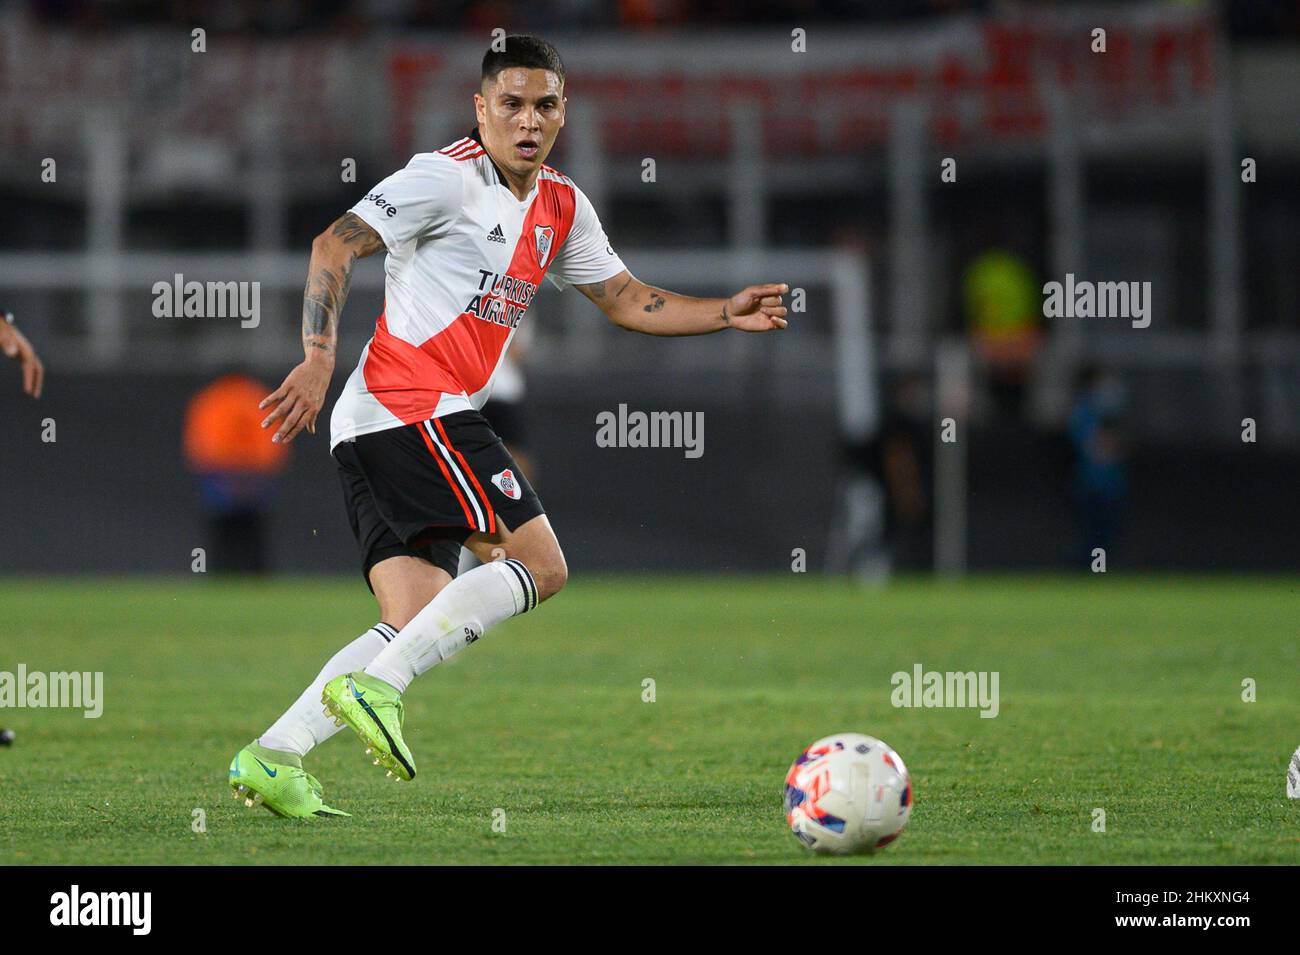 Buenos Aires, Argentina. 05th Feb, 2022. River Plate midfielder Juan Fernando Quintero passes the ball during a friendly match between River Plate and Velez Sarfield, at the Antonio Vespucio Liberti Monumental Stadium. (Photo by Manuel Cortina/SOPA Images/Sipa USA) Credit: Sipa USA/Alamy Live News Stock Photo